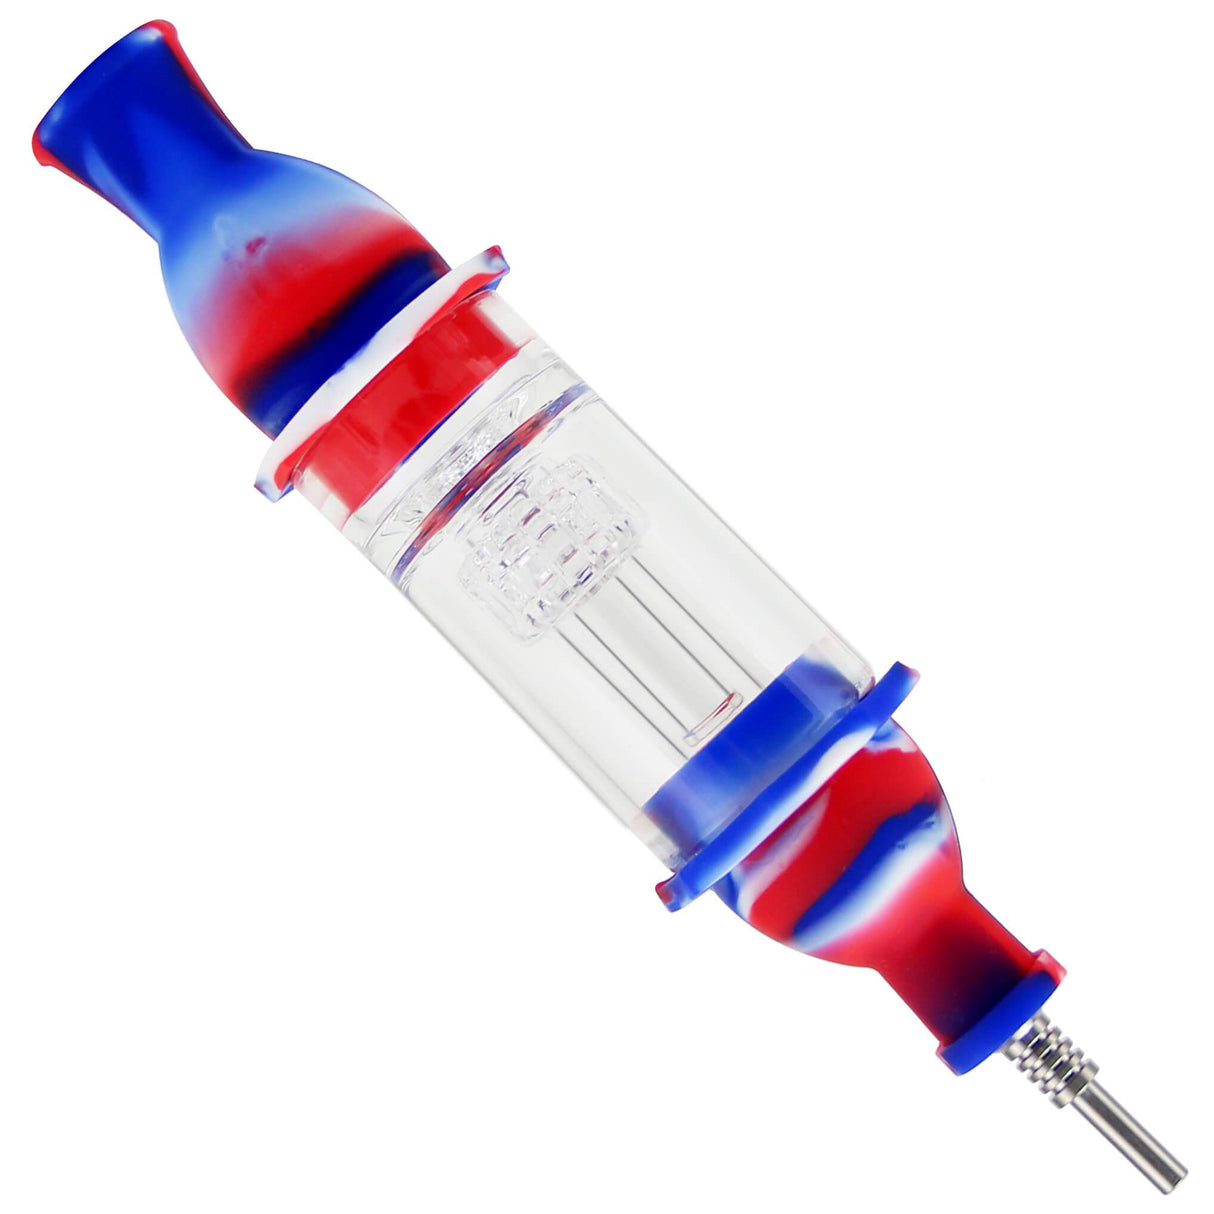 PILOT DIARY Honey Straw with Water Filtering in Red and Blue - Angled View